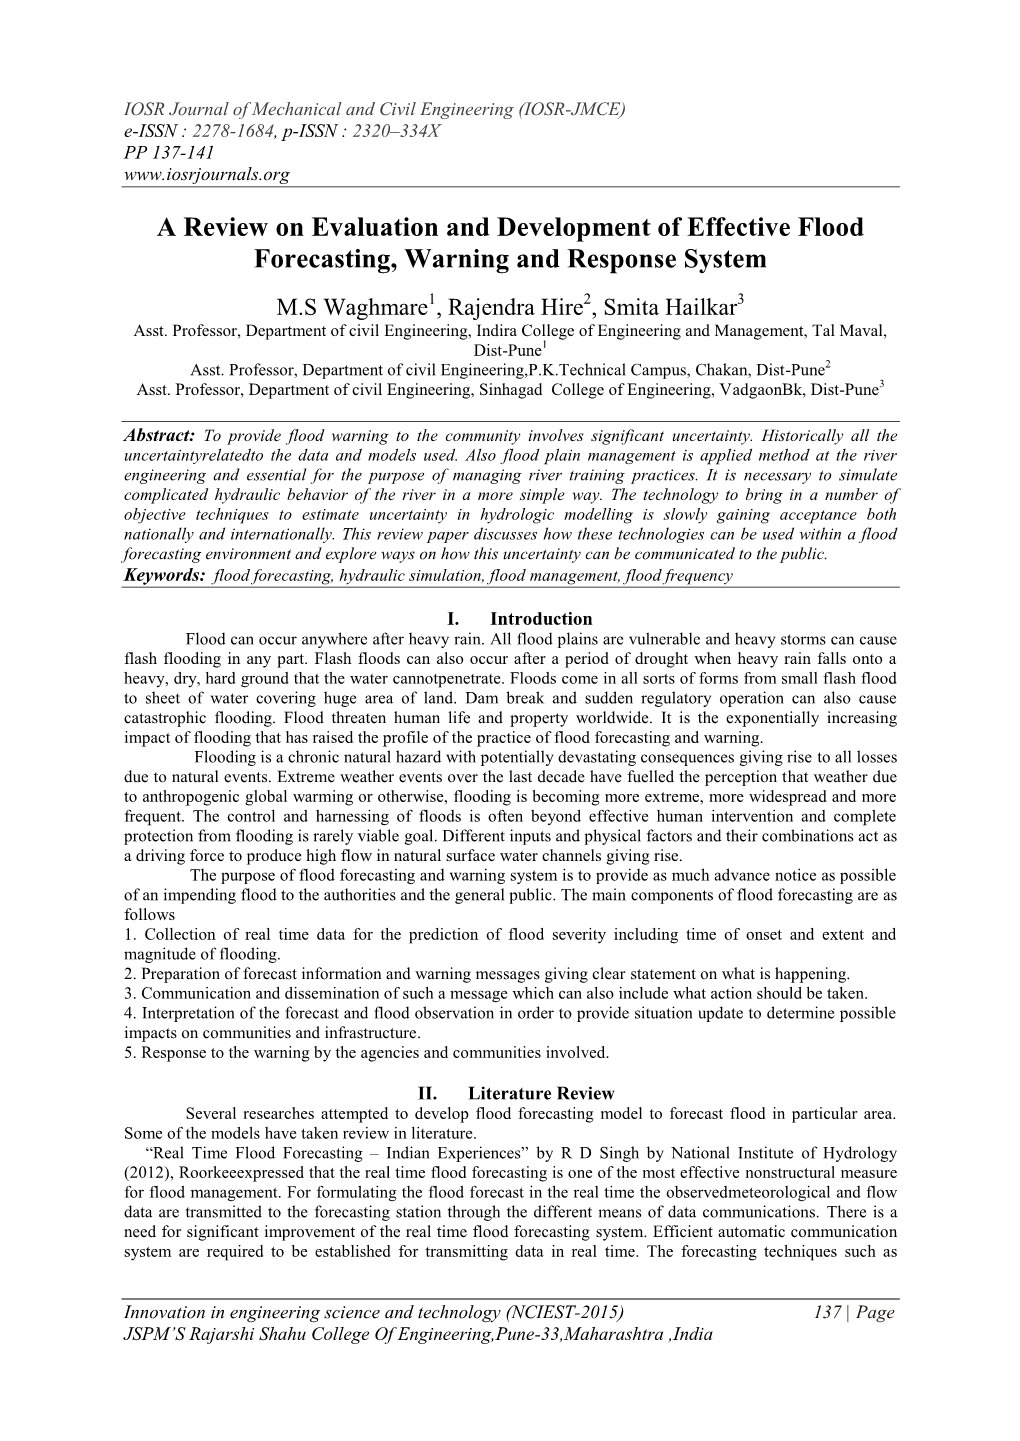 A Review on Evaluation and Development of Effective Flood Forecasting, Warning and Response System